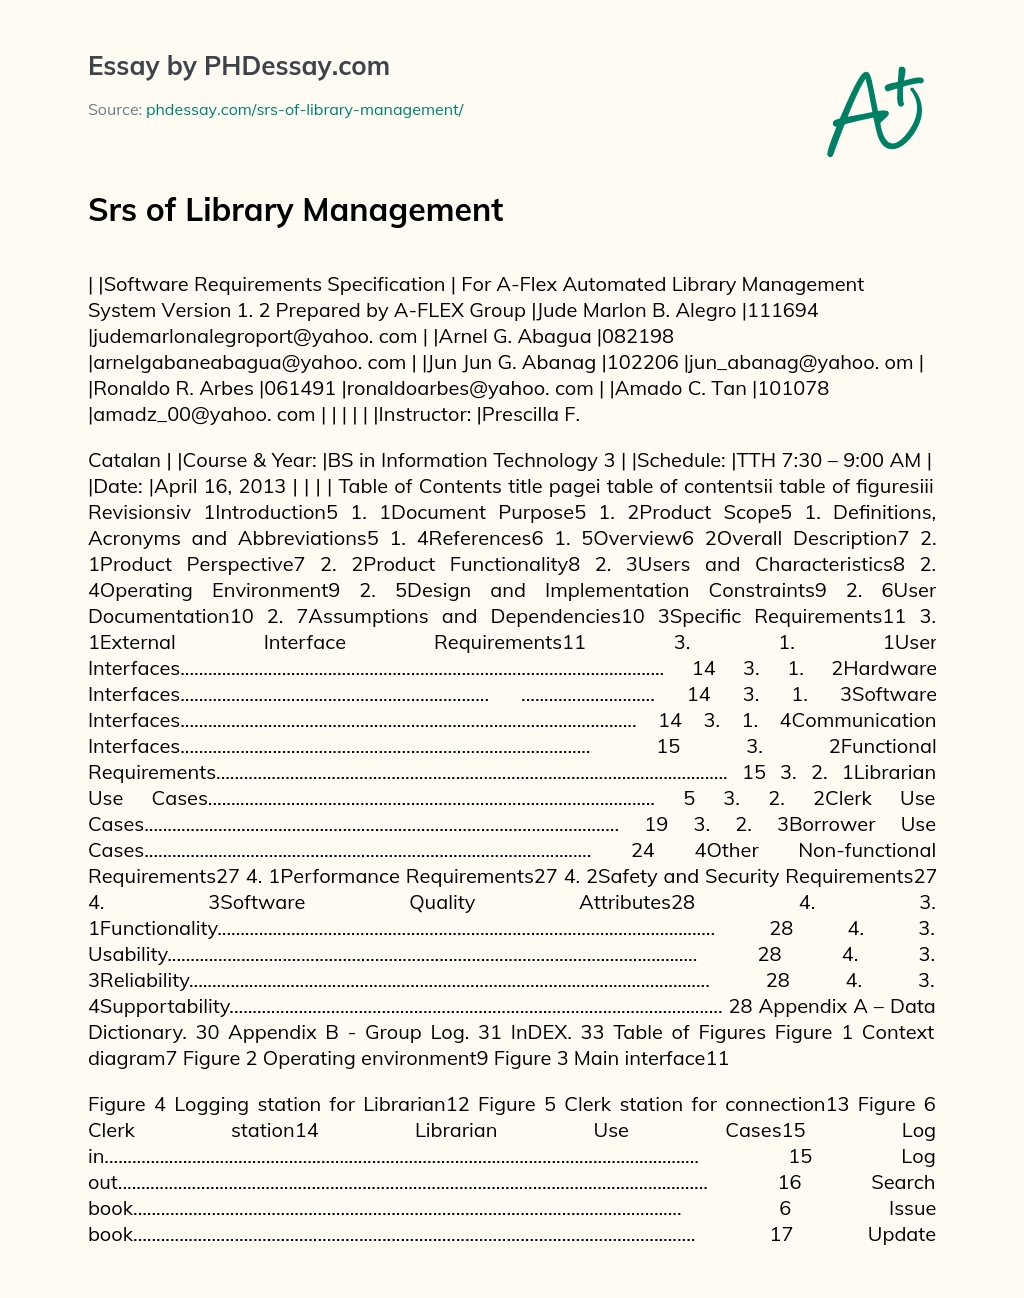 SRS of Library Management essay